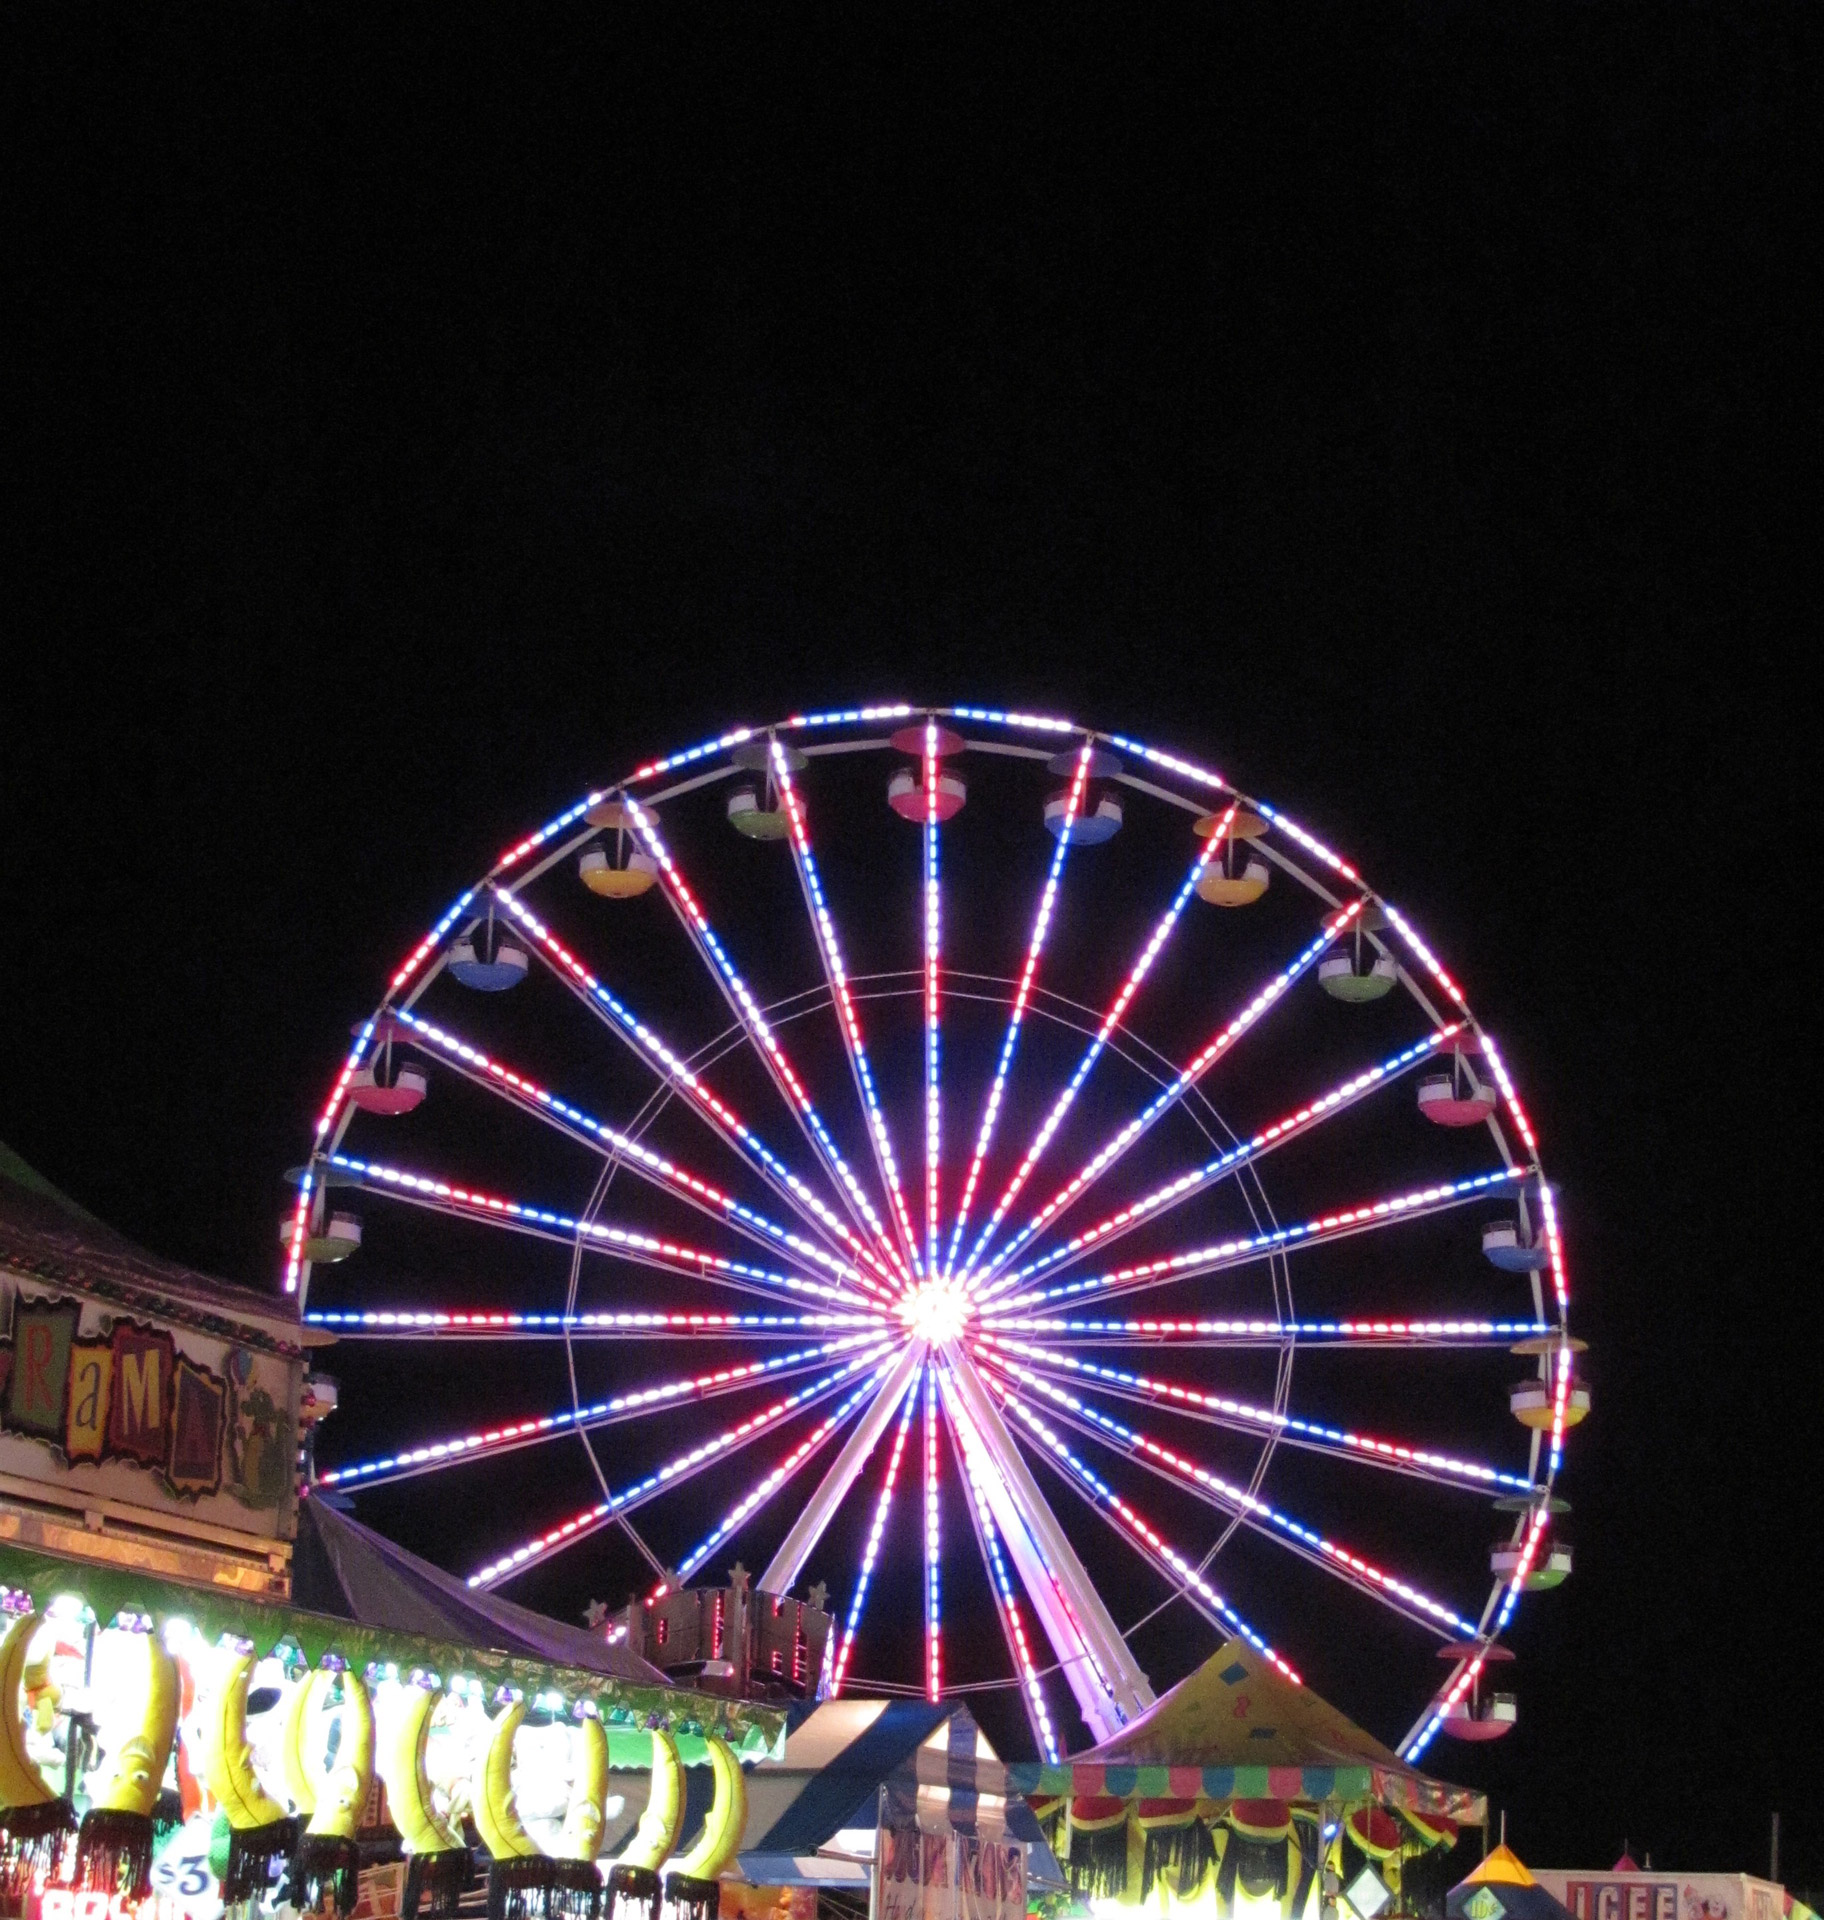 Ferris Wheel at night at the New York State fair